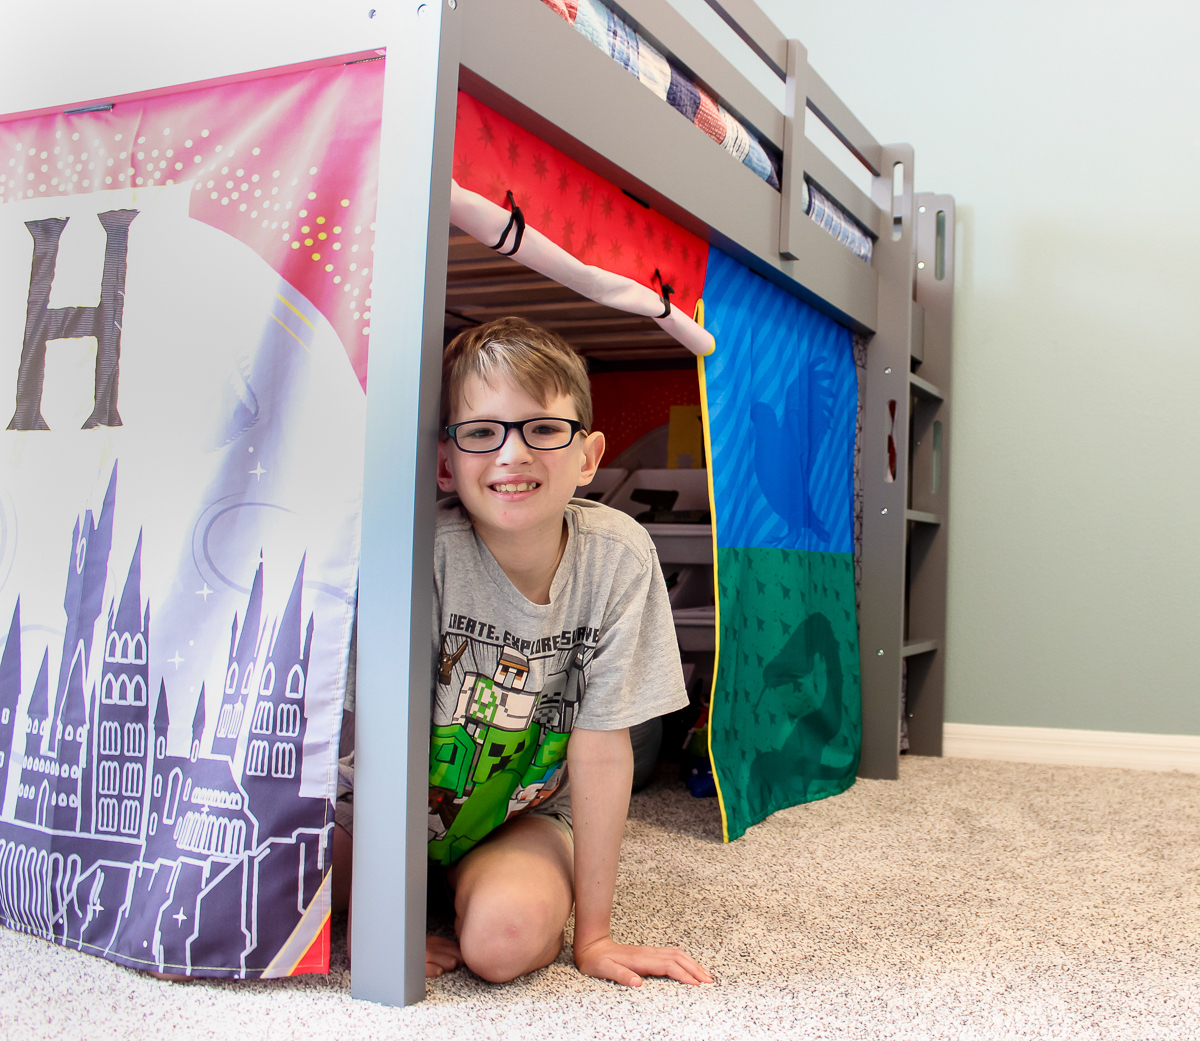 Transform Your Child’s Room With A Delta Children Makeover Fit For A Wizard